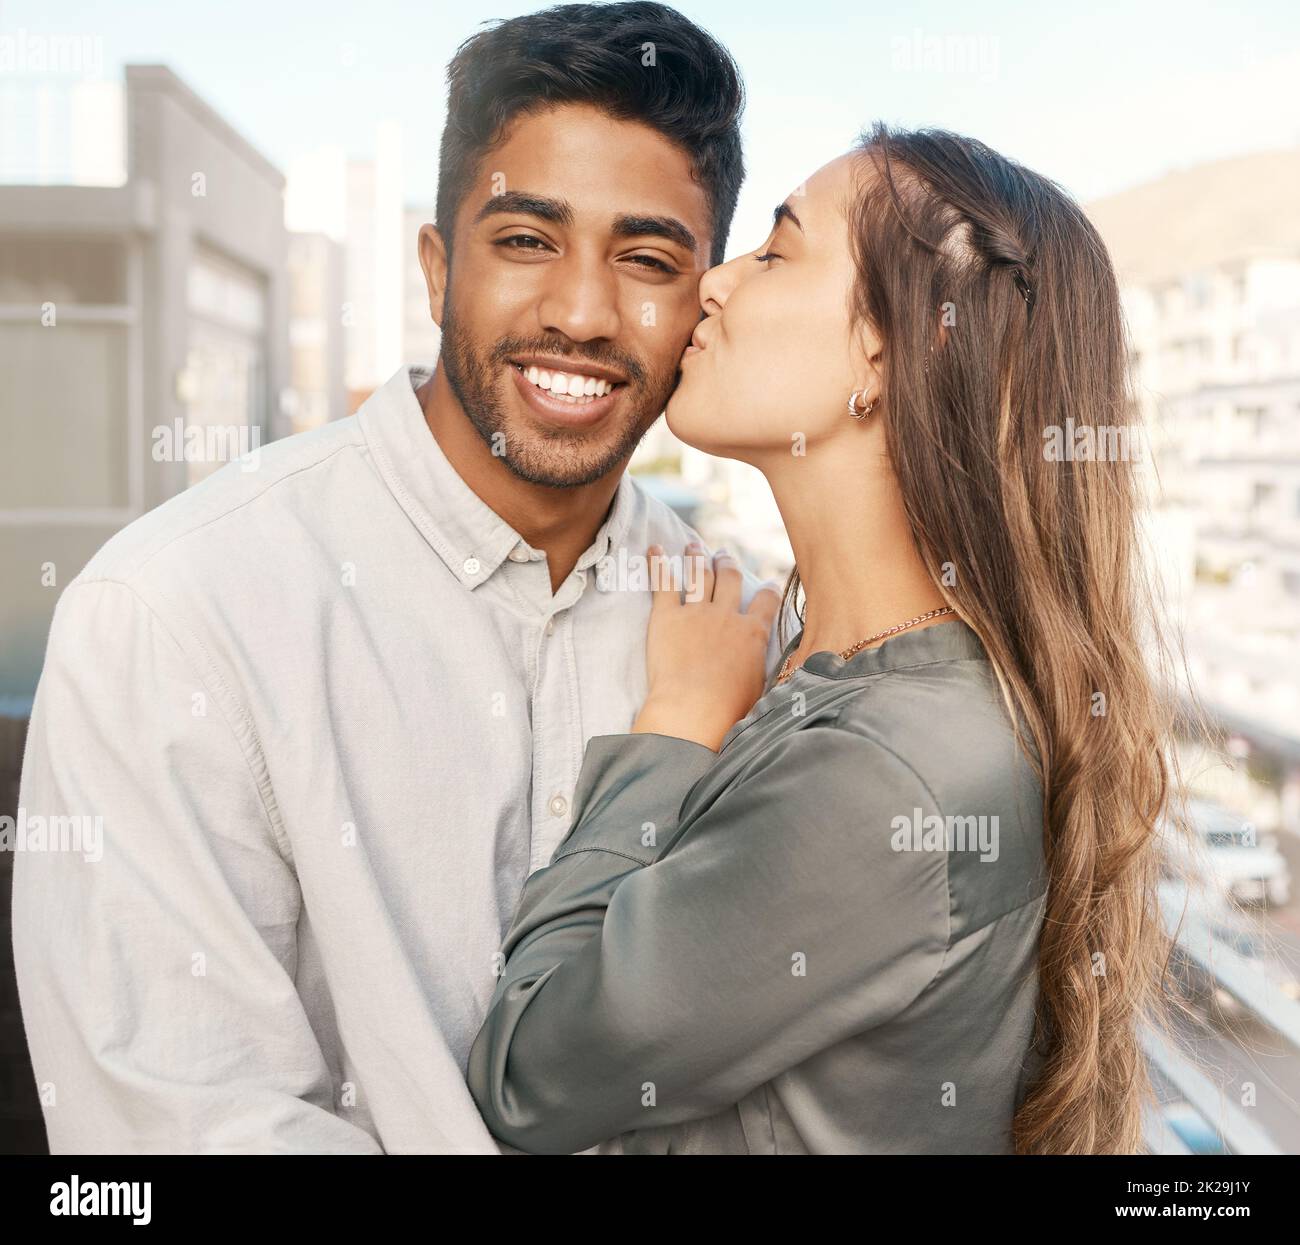 Happy couple, love and kiss on cheek from girlfriend bonding with boyfriend standing on a city building balcony on a holiday. Portrait of indian man Stock Photo